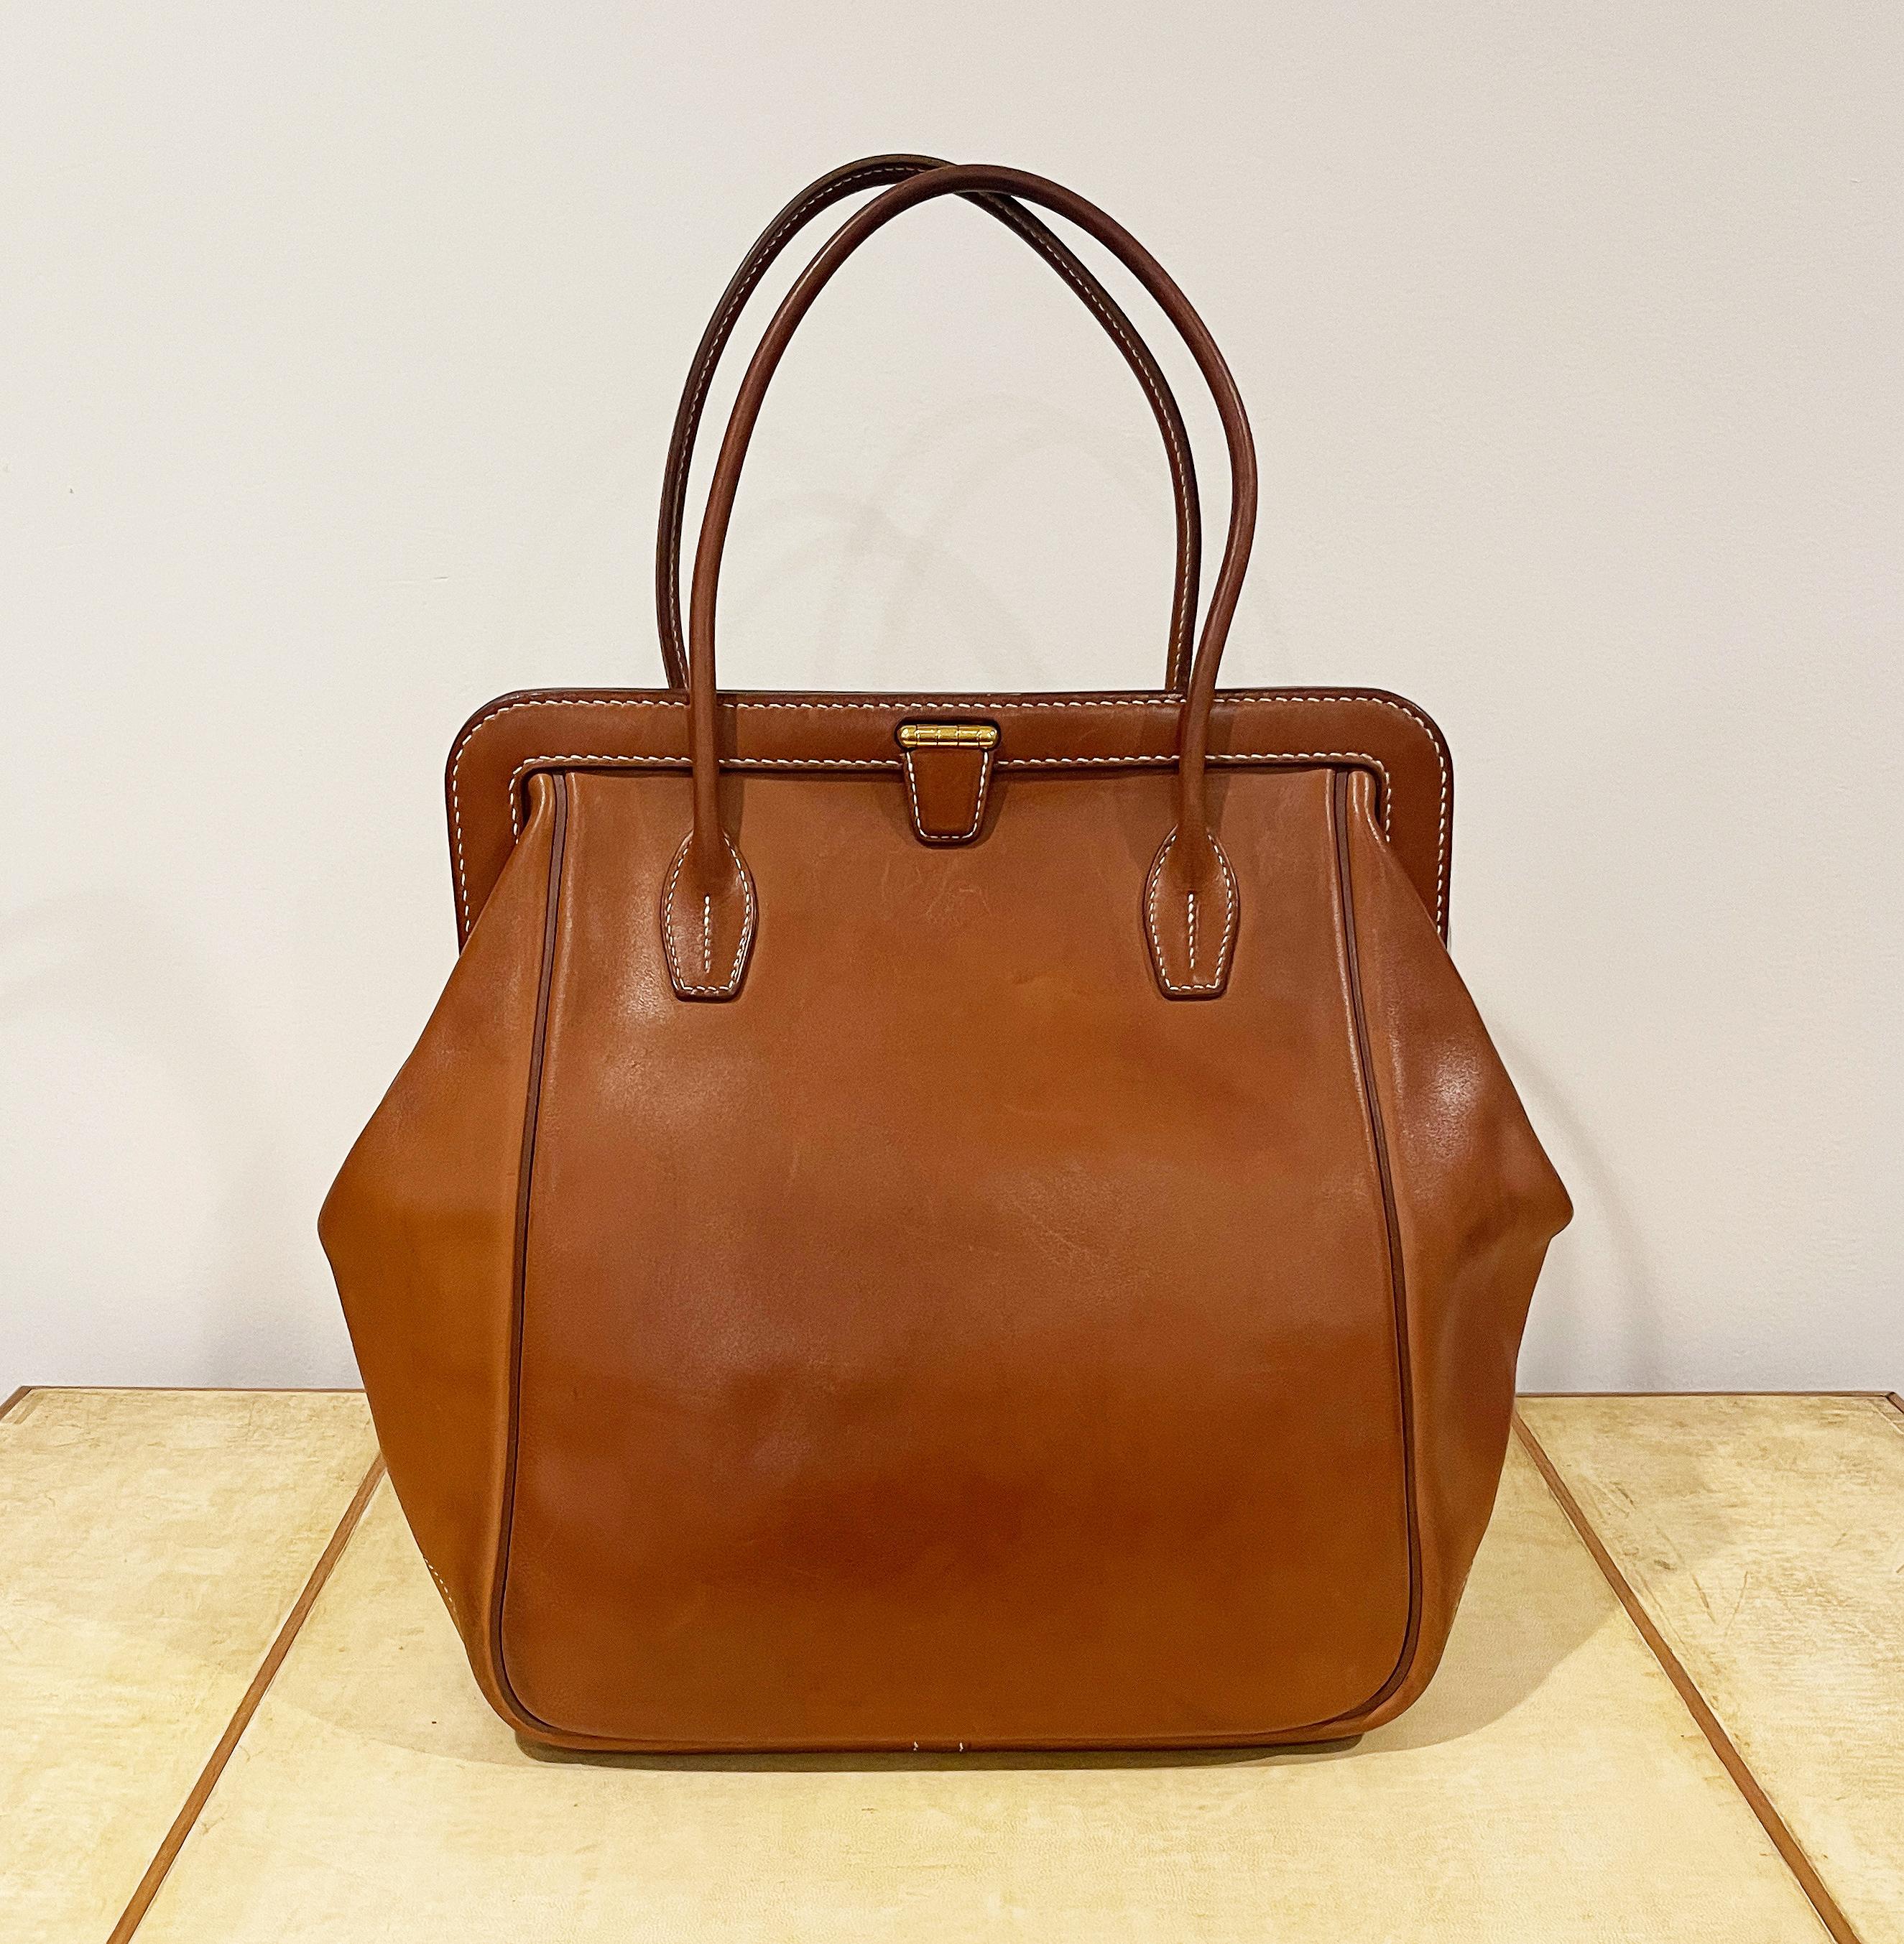 HERMES Paris, very rare Tan Barenia Calfskin Convoyeur Bag.
Limited Edition
This exquisite bag, stamped “Hermès Paris Made in France” and numbered, carries the blind stamp ‘R’ indicating its creation year as 2013. Additionally, it is marked with